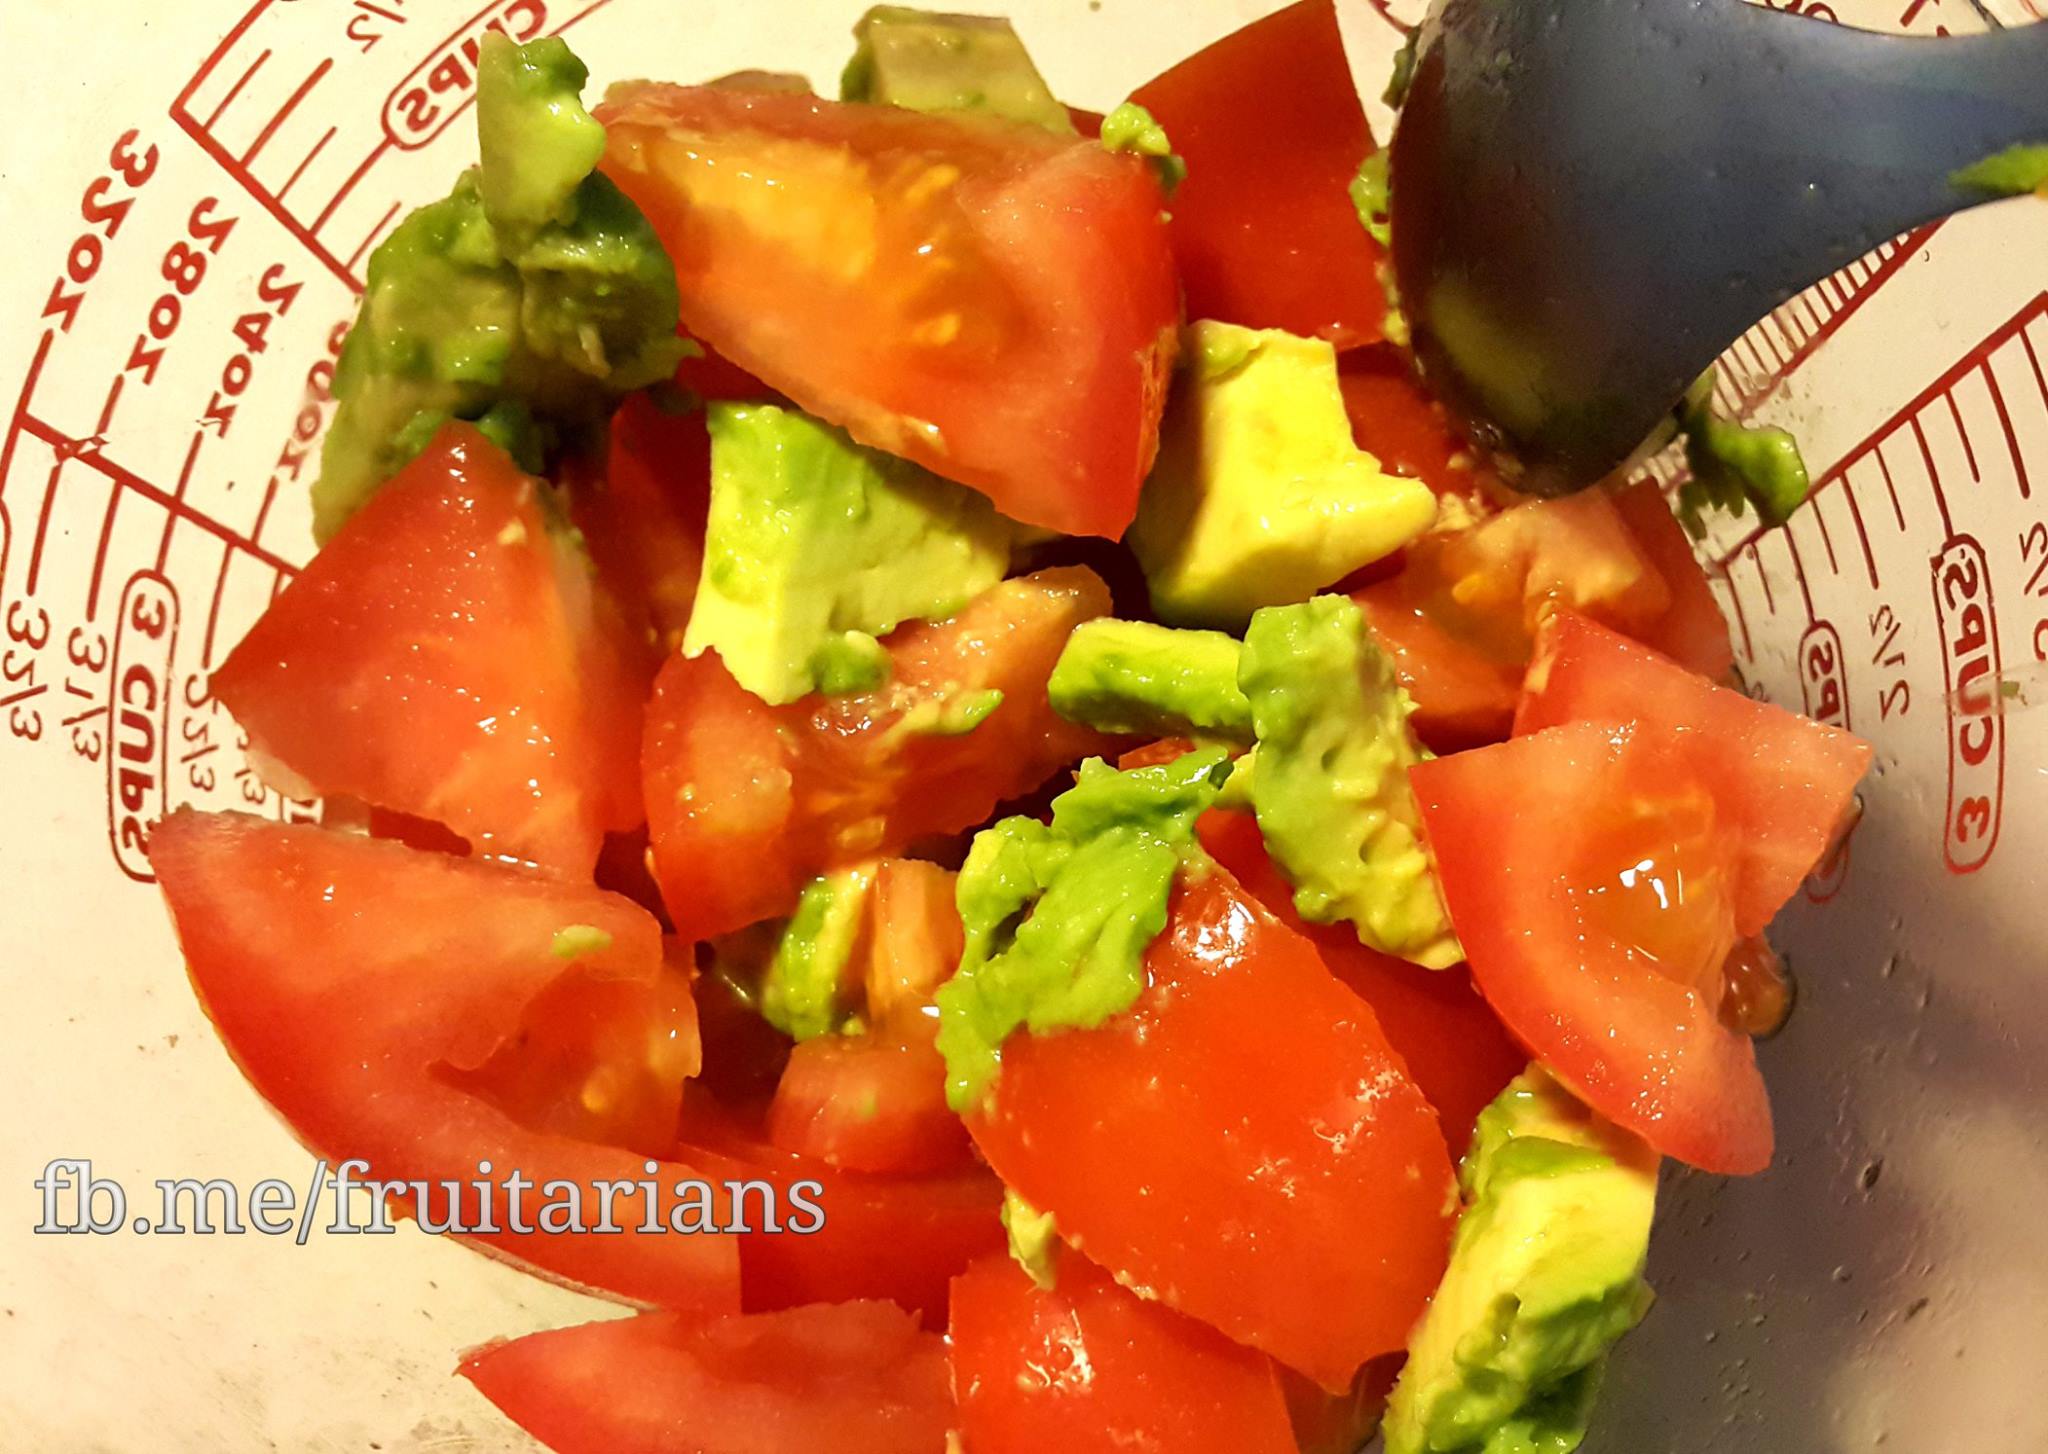 1) cut tomatoes and avocados 2) eat out of a measuring cup :)